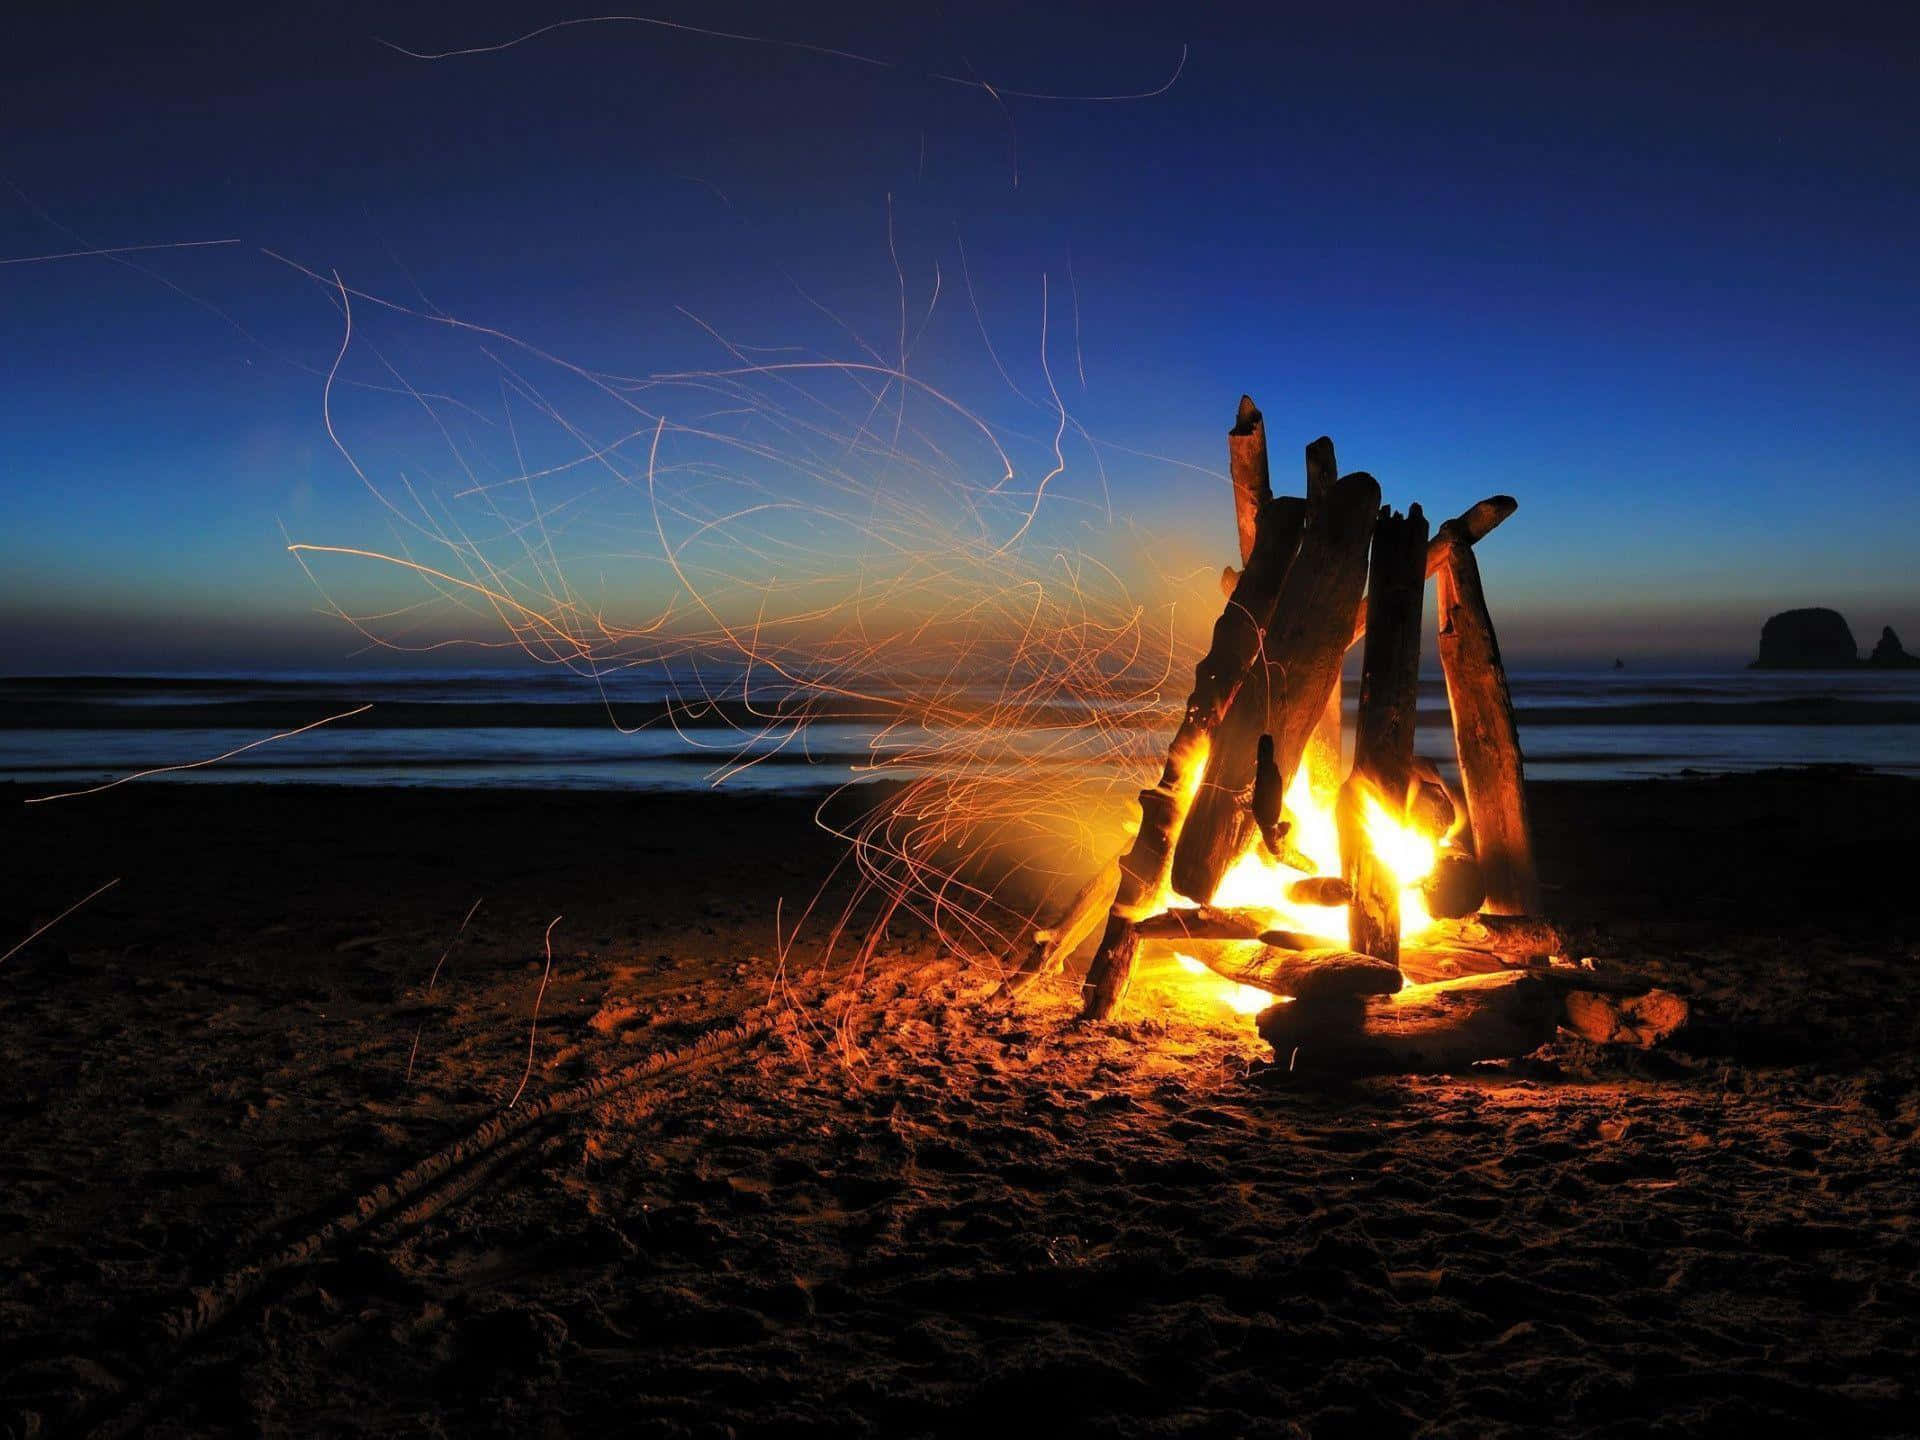 A Sneak Peek Into a Wilderness Night: The Radiating Heat From a Campfire